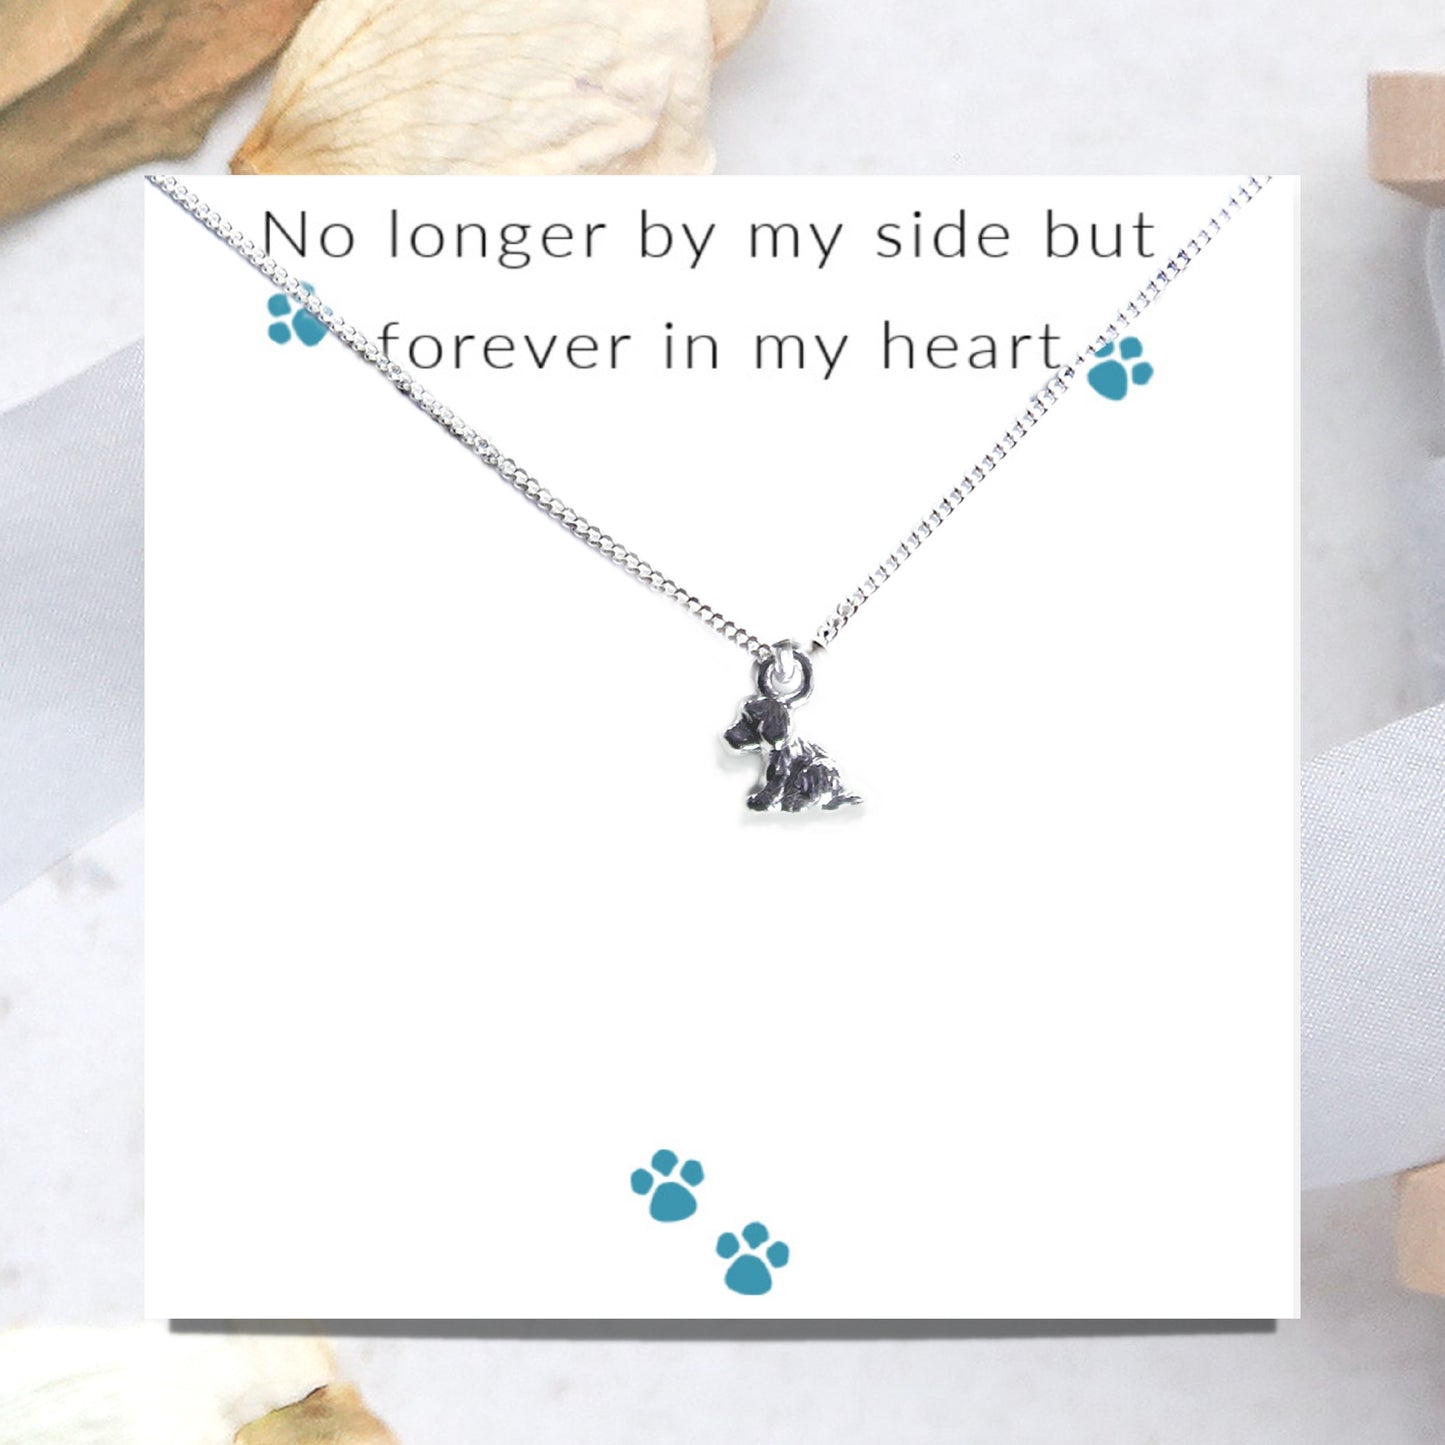 No Longer By My Side - Dog Necklace on Message Card